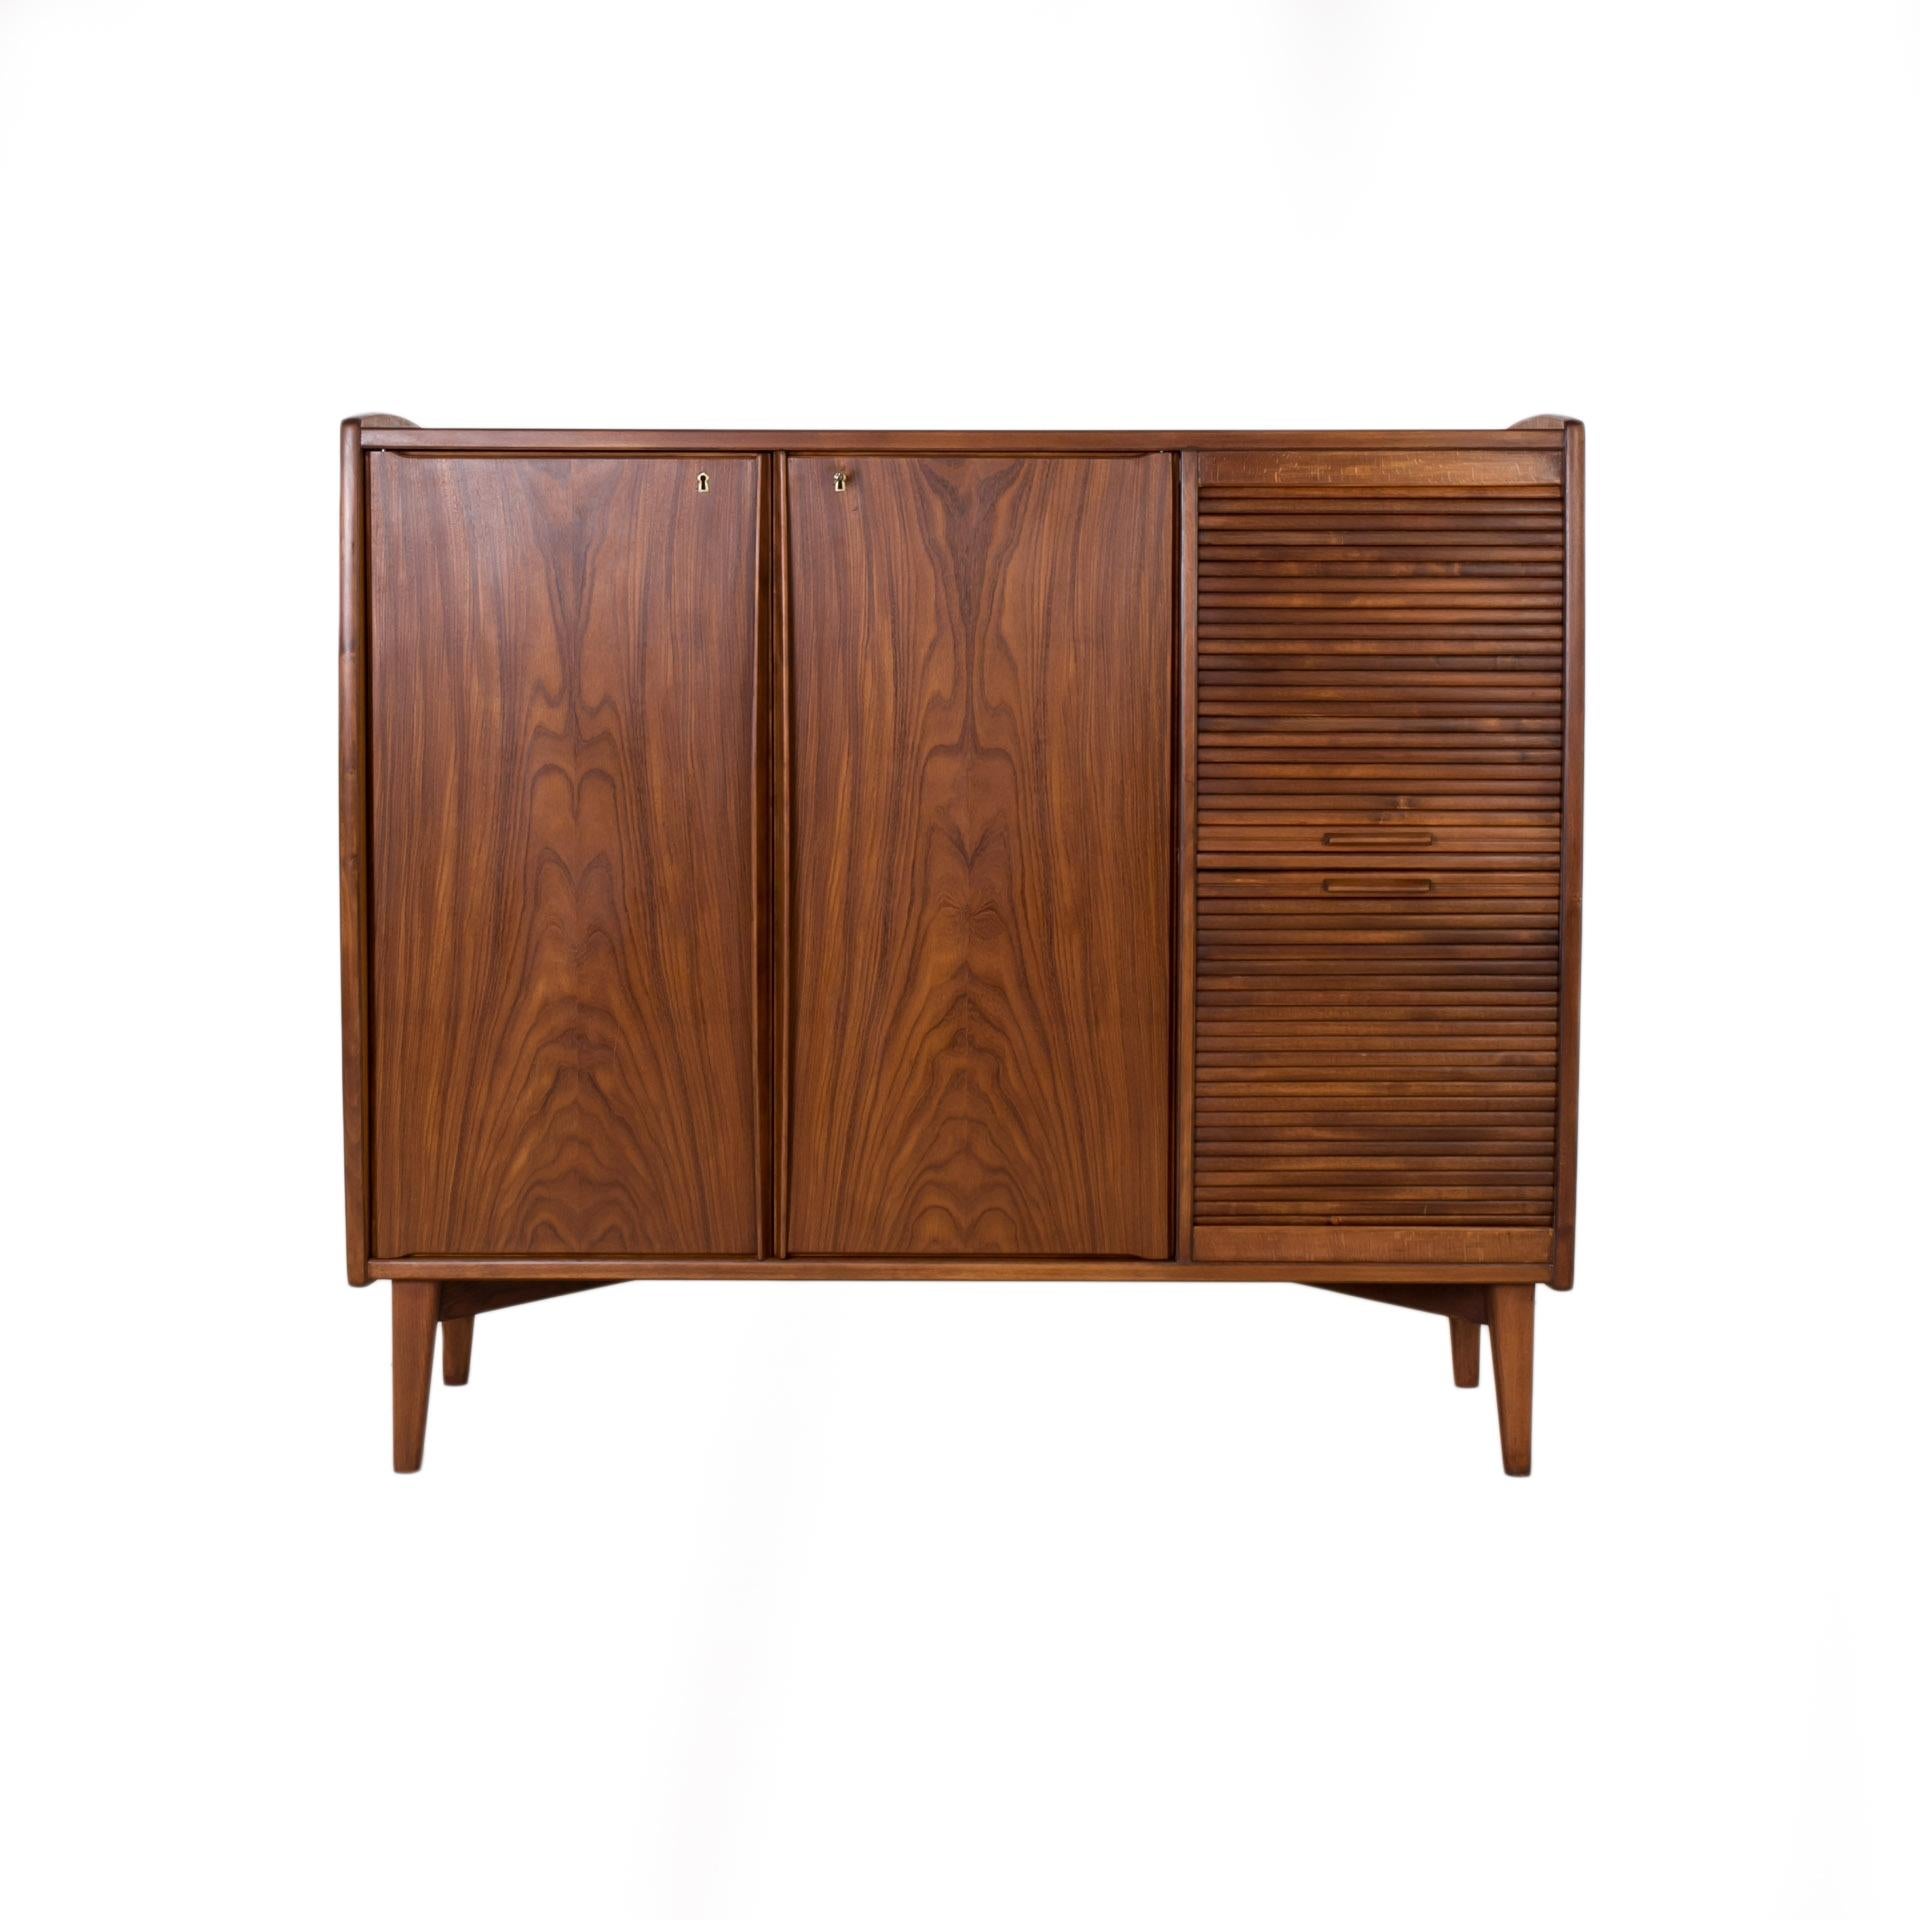 Rare Teak Sideboard or Bar Cabinet by Alfred Sand, Norway, 1960s

This absolutely rare sideboard was designed by Alfred Sand for MOBELFABRIKK FLEKKEFJORD around 1960s and still has the original label on the back side of the door. The piece is